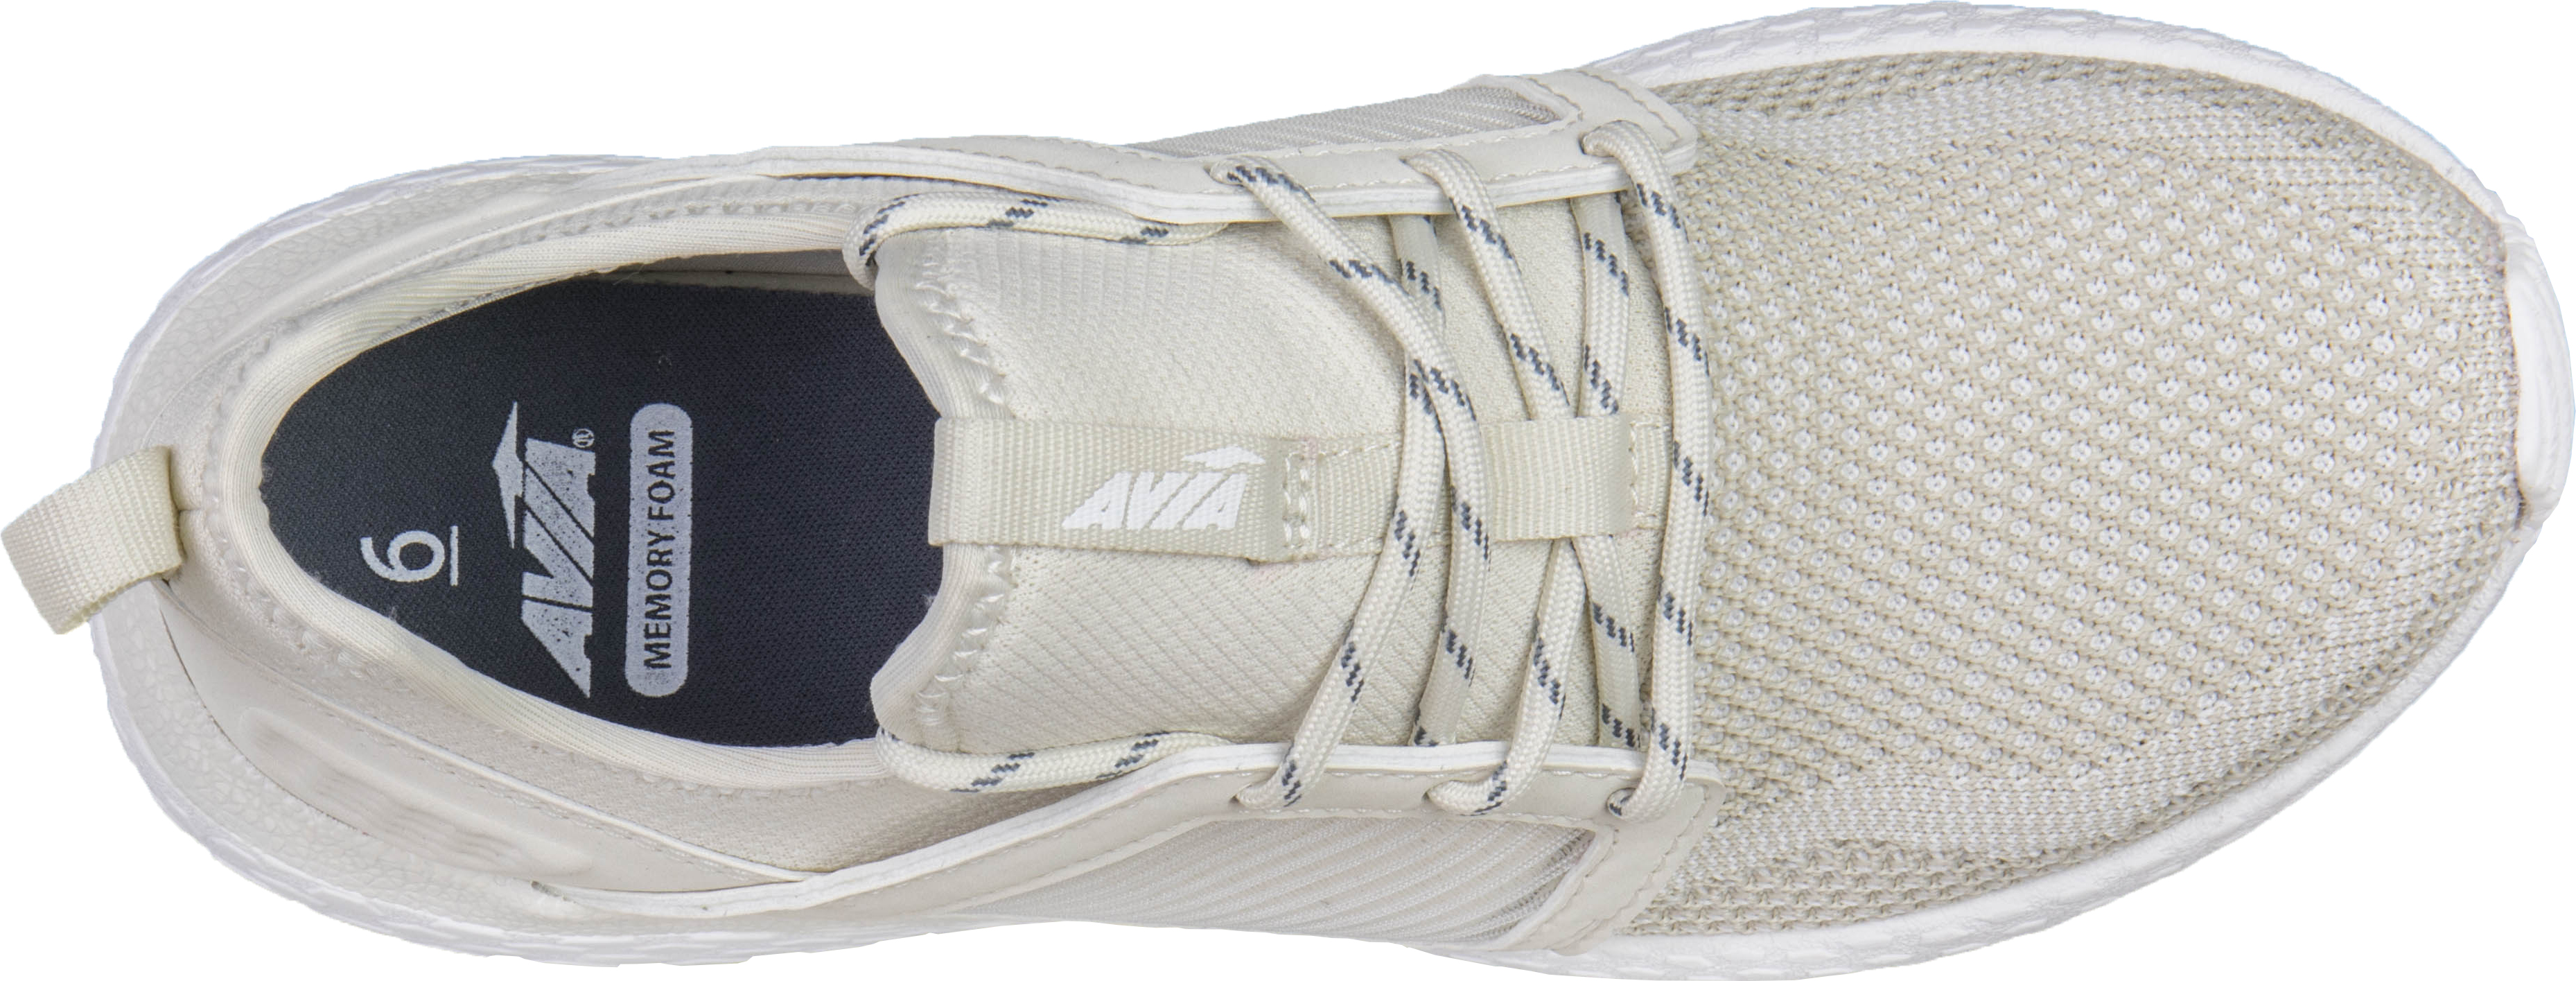 Women's Avia Caged Knit Sneaker - image 5 of 5